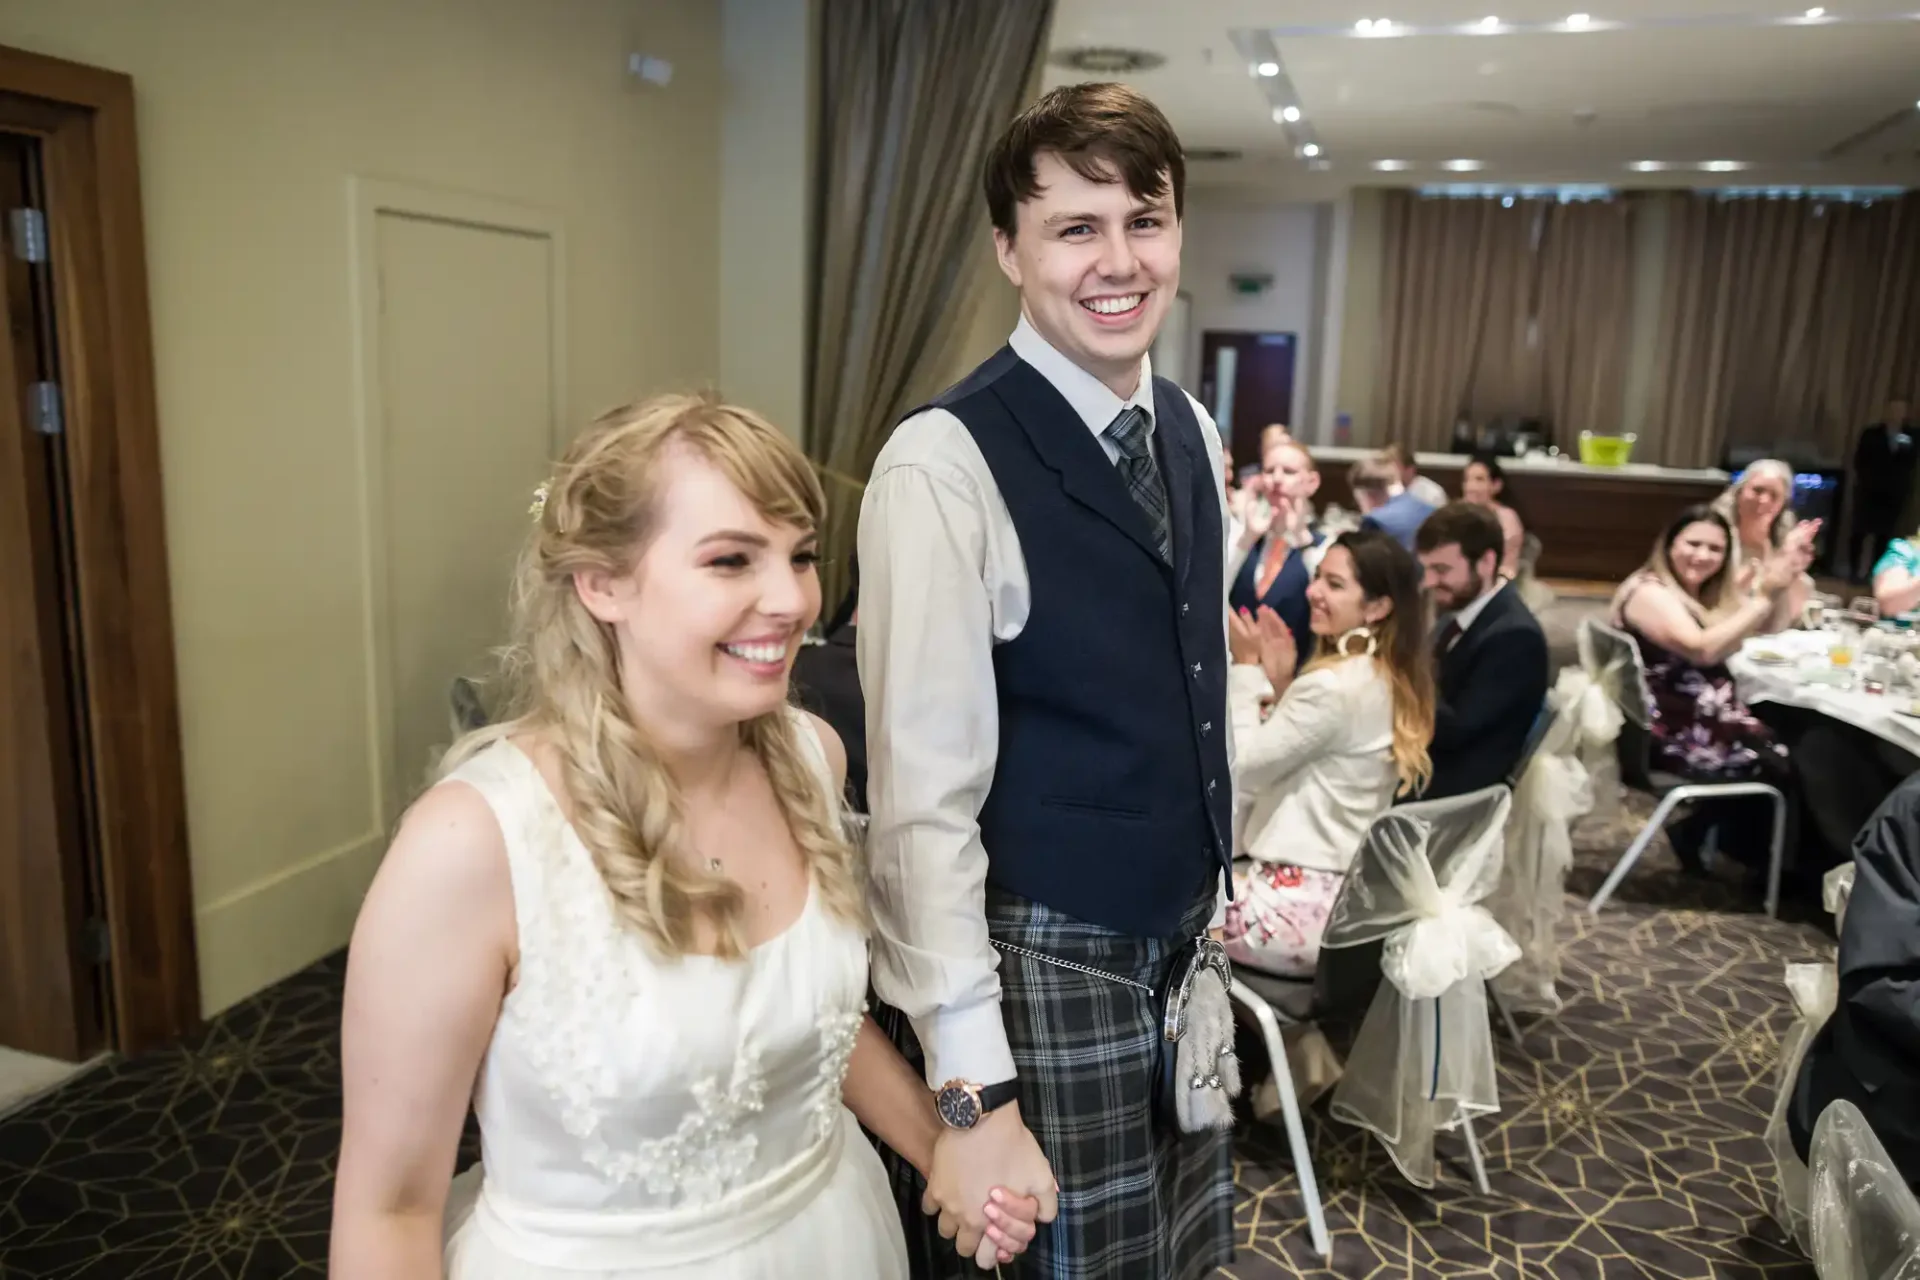 A bride and groom smiling as they walk hand in hand through a banquet hall with seated guests watching.